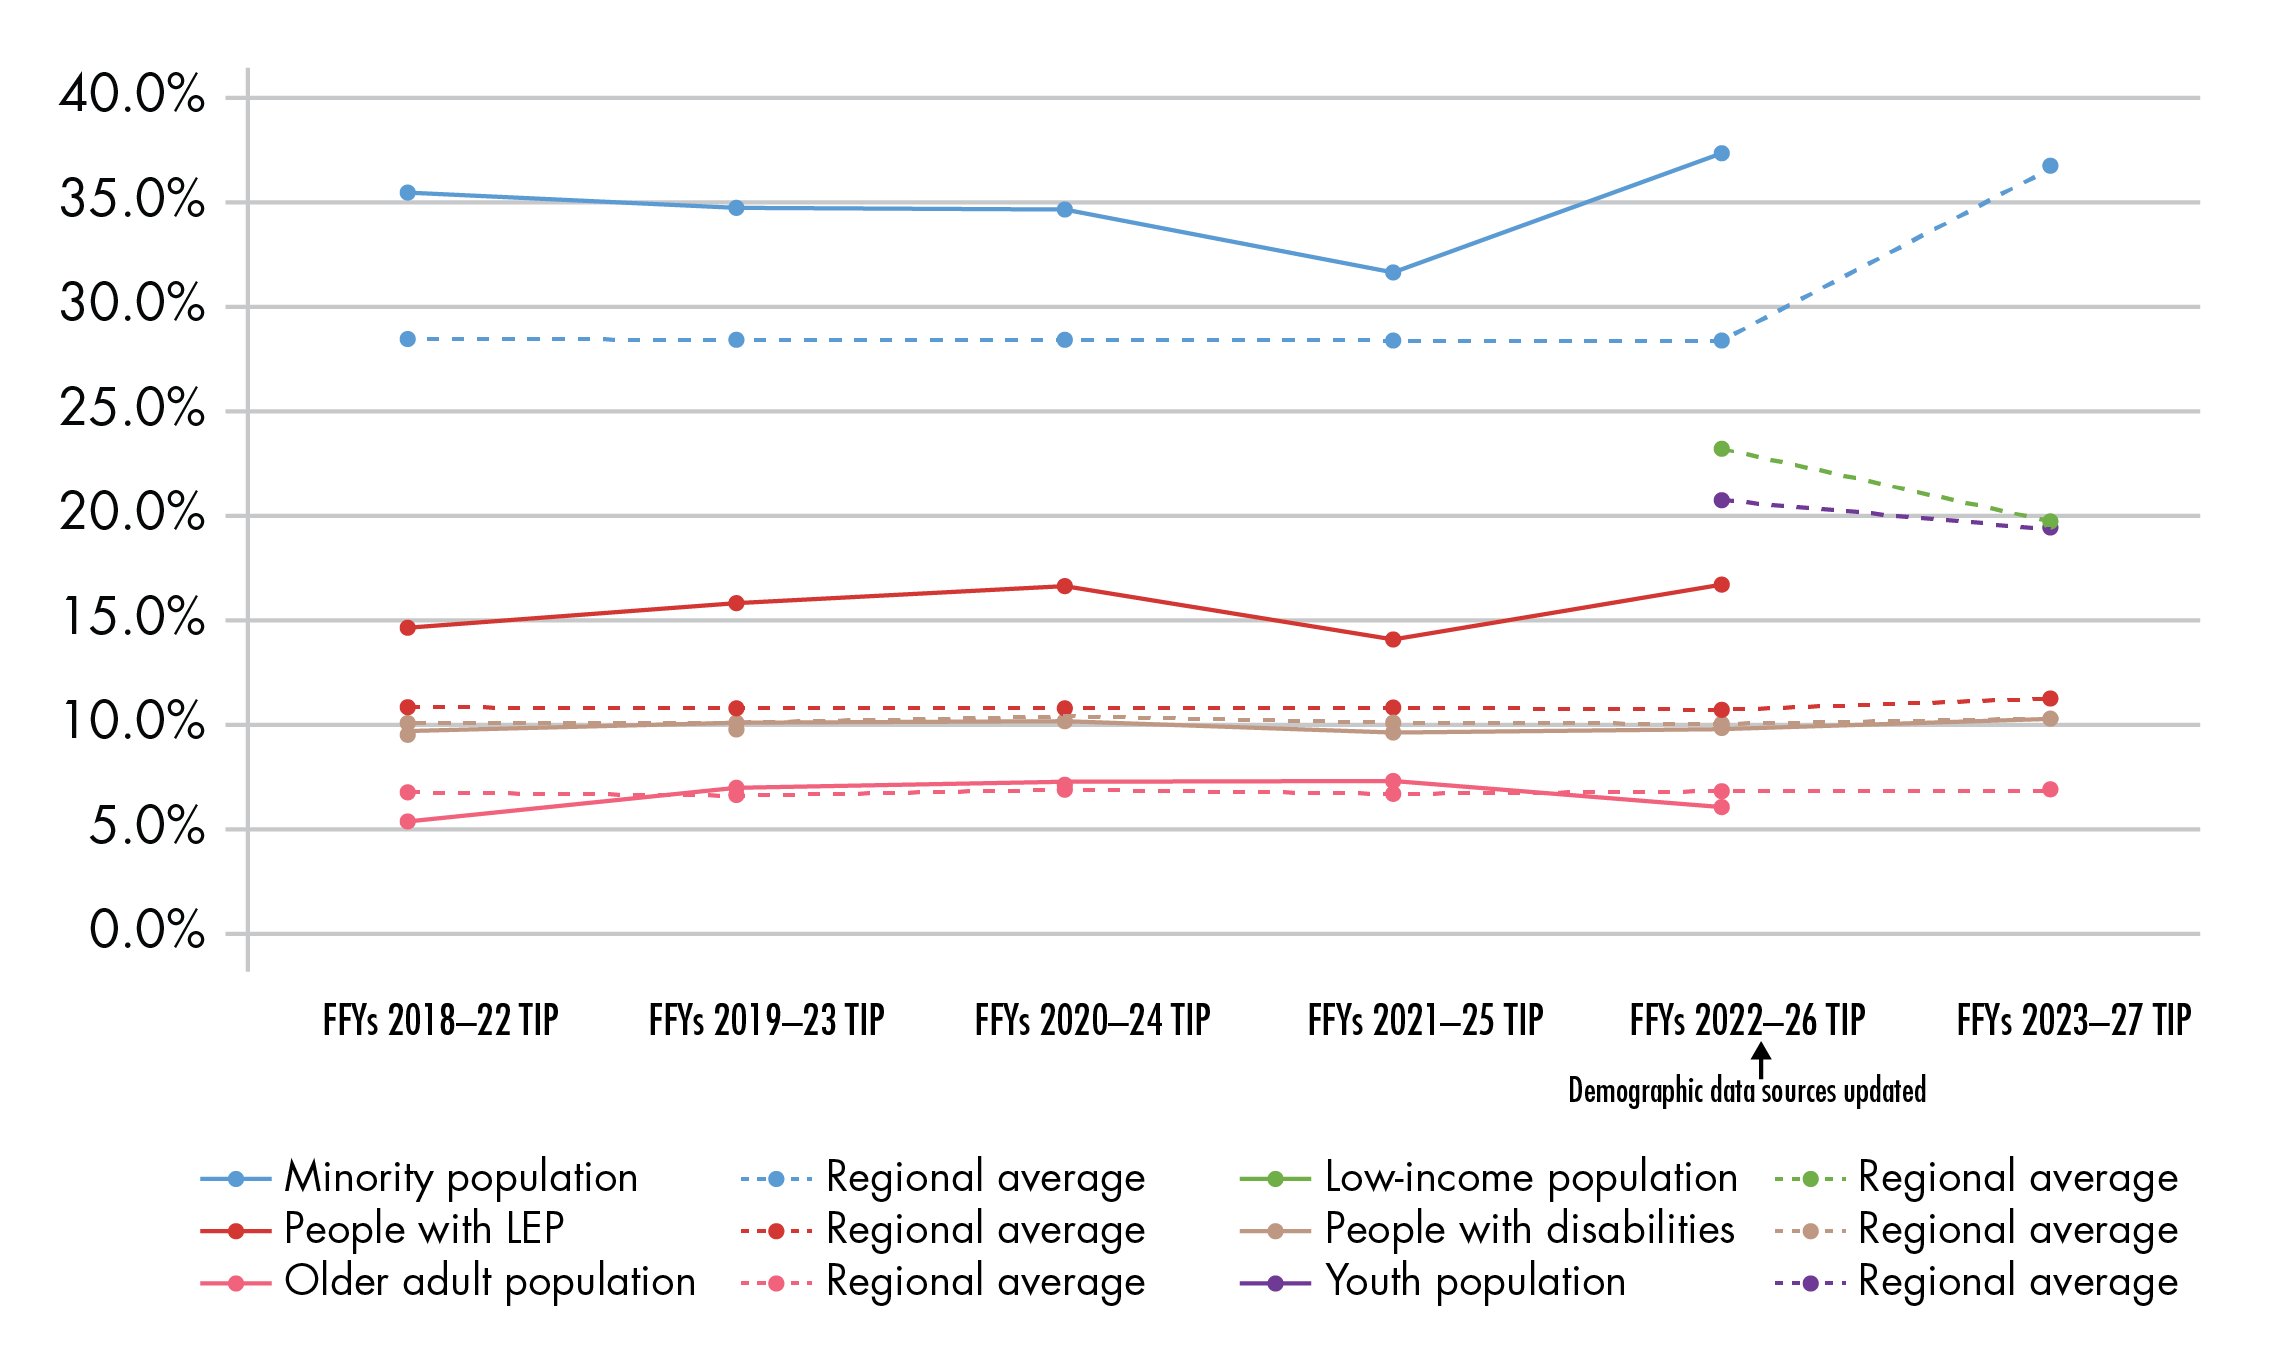 Figure 6-8 shows the share of TE populations served (out of the entire population served or impacted) by Regional Target-funded projects in each TIP from the FFYs 2018¬¬–22 TIP to the FFYs 2023–27 TIP. This figure will be updated for the public review draft of the TIP when the necessary information is available to complete the required analysis.